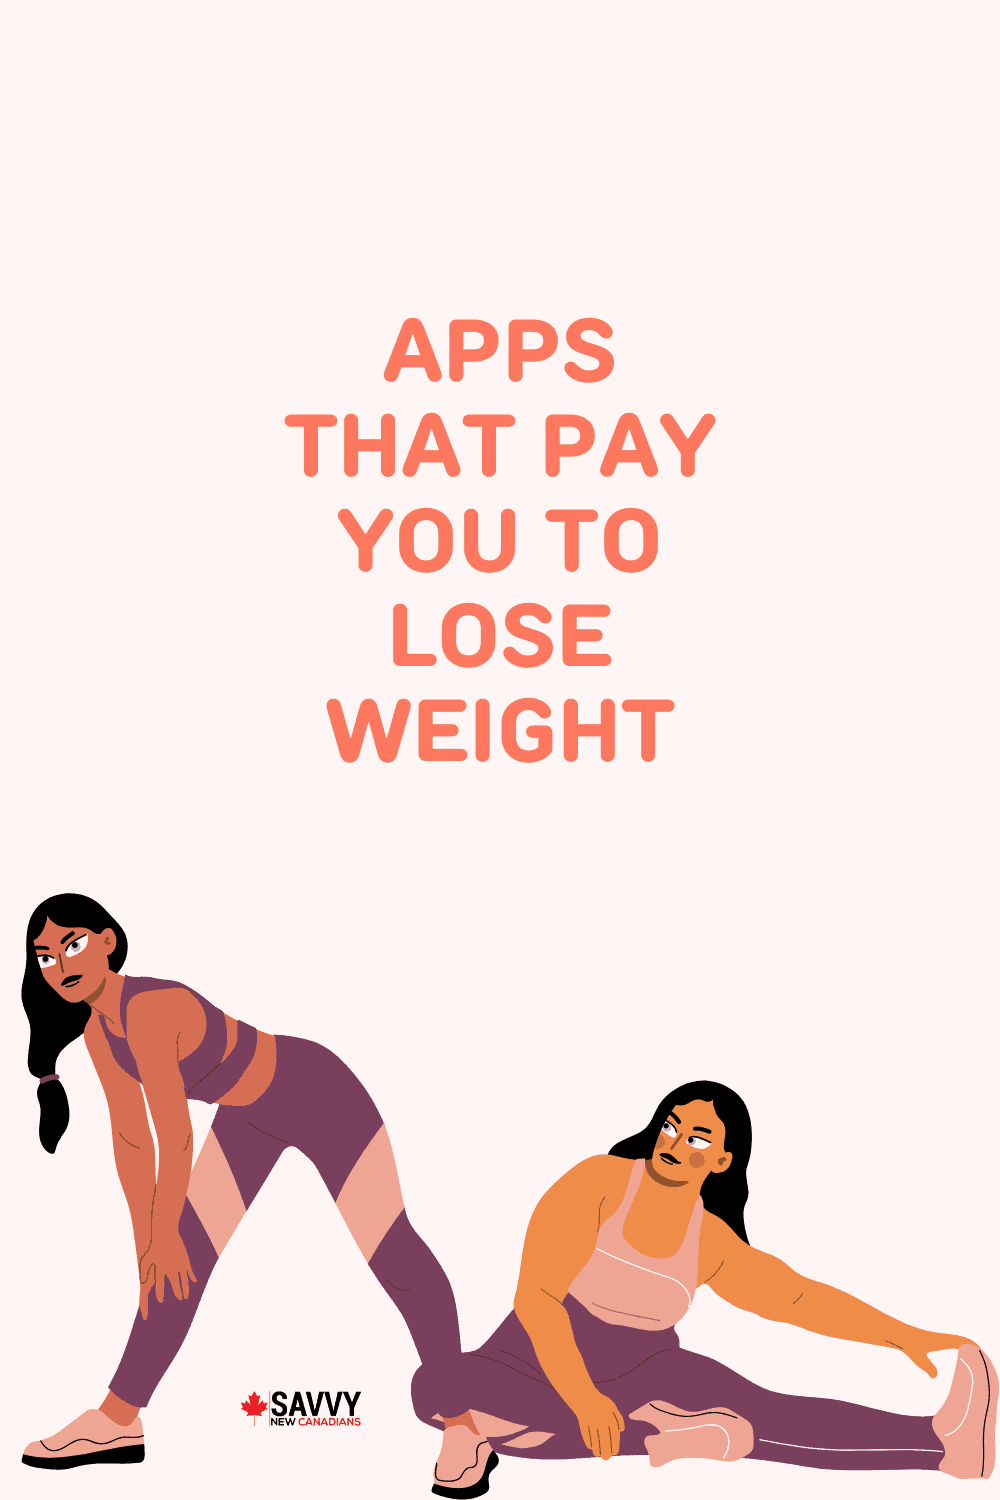 10 Apps That Pay You To Lose Weight in 2022